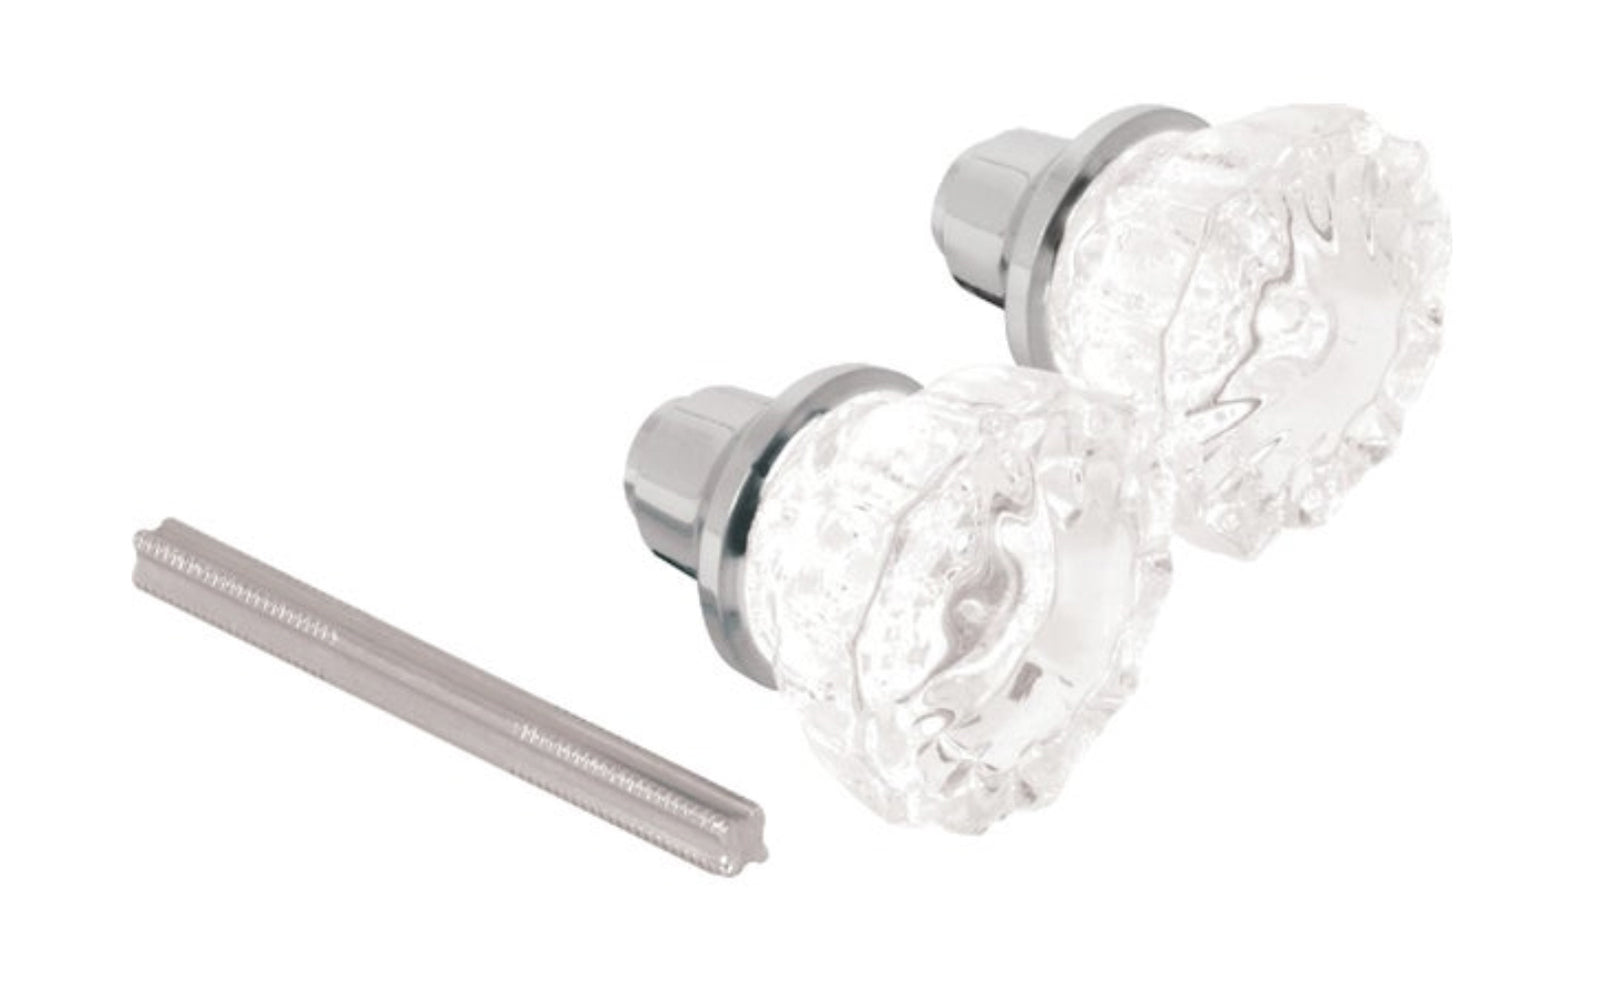 A basic & economy glass doorknob set with lacquered satin nickel finish. 2